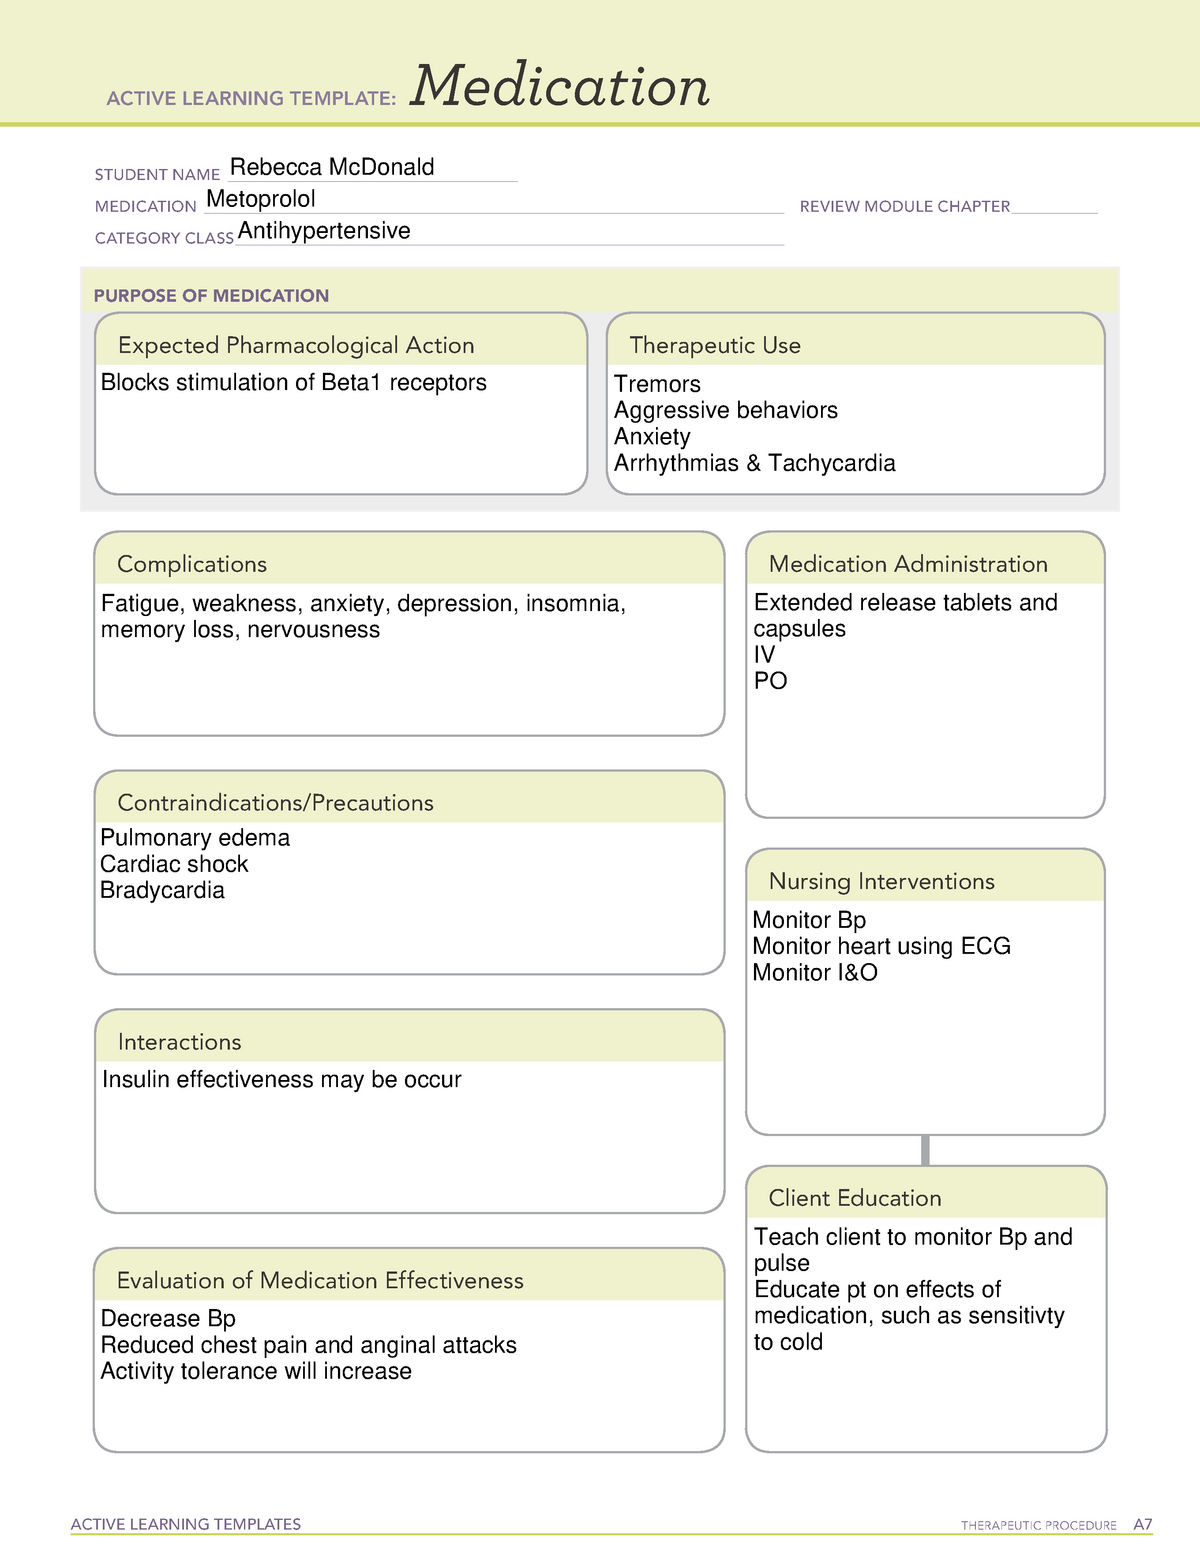 Metoprolol Med Card ACTIVE LEARNING TEMPLATES THERAPEUTIC PROCEDURE A